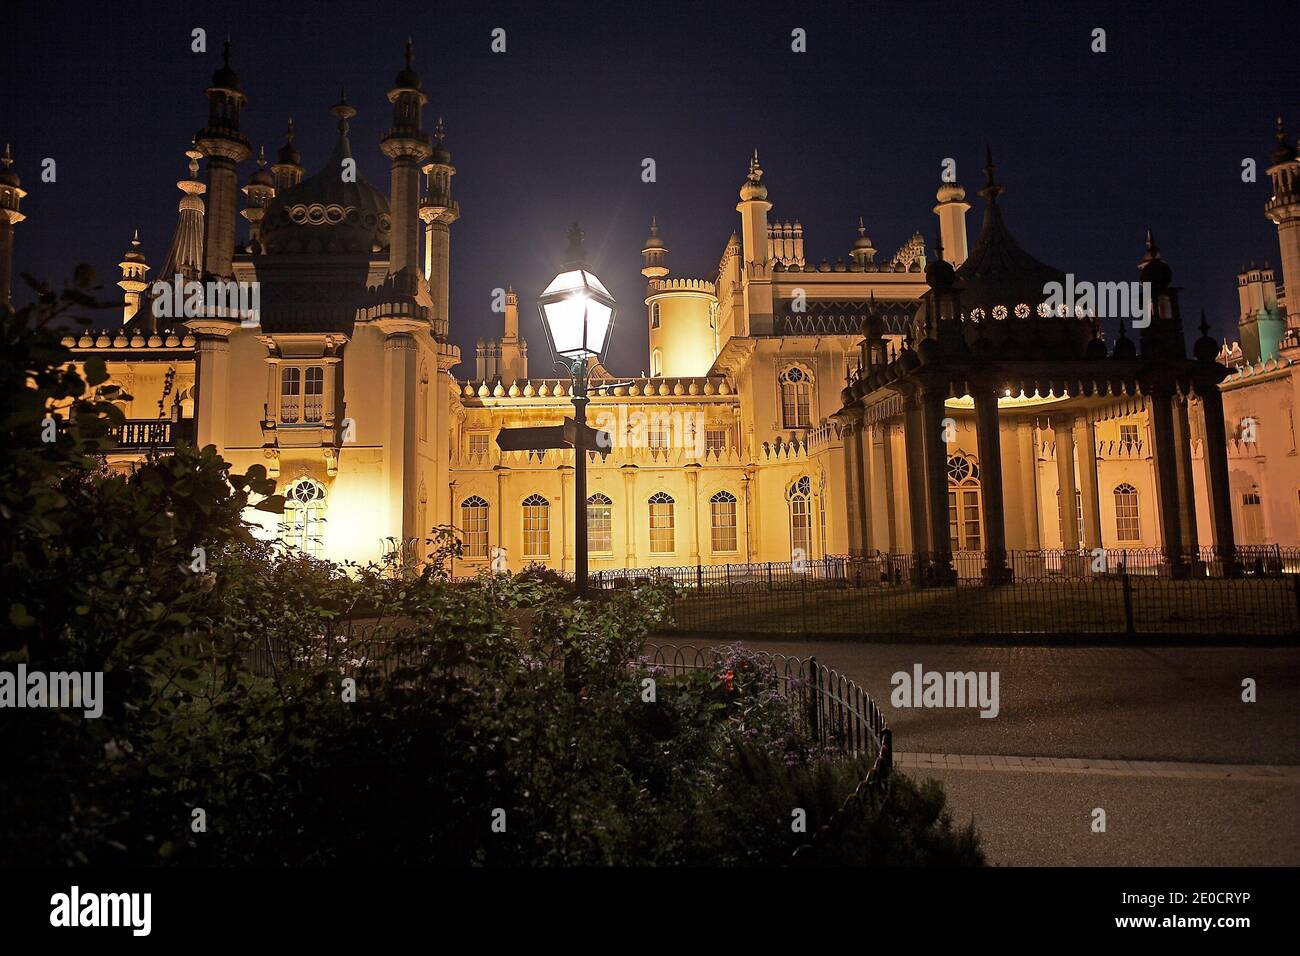 Royal pavilion in brighton. The palace of George IV Prince of Wales born in 1762, and the oldest son of George III. The palace photographed at night Stock Photo